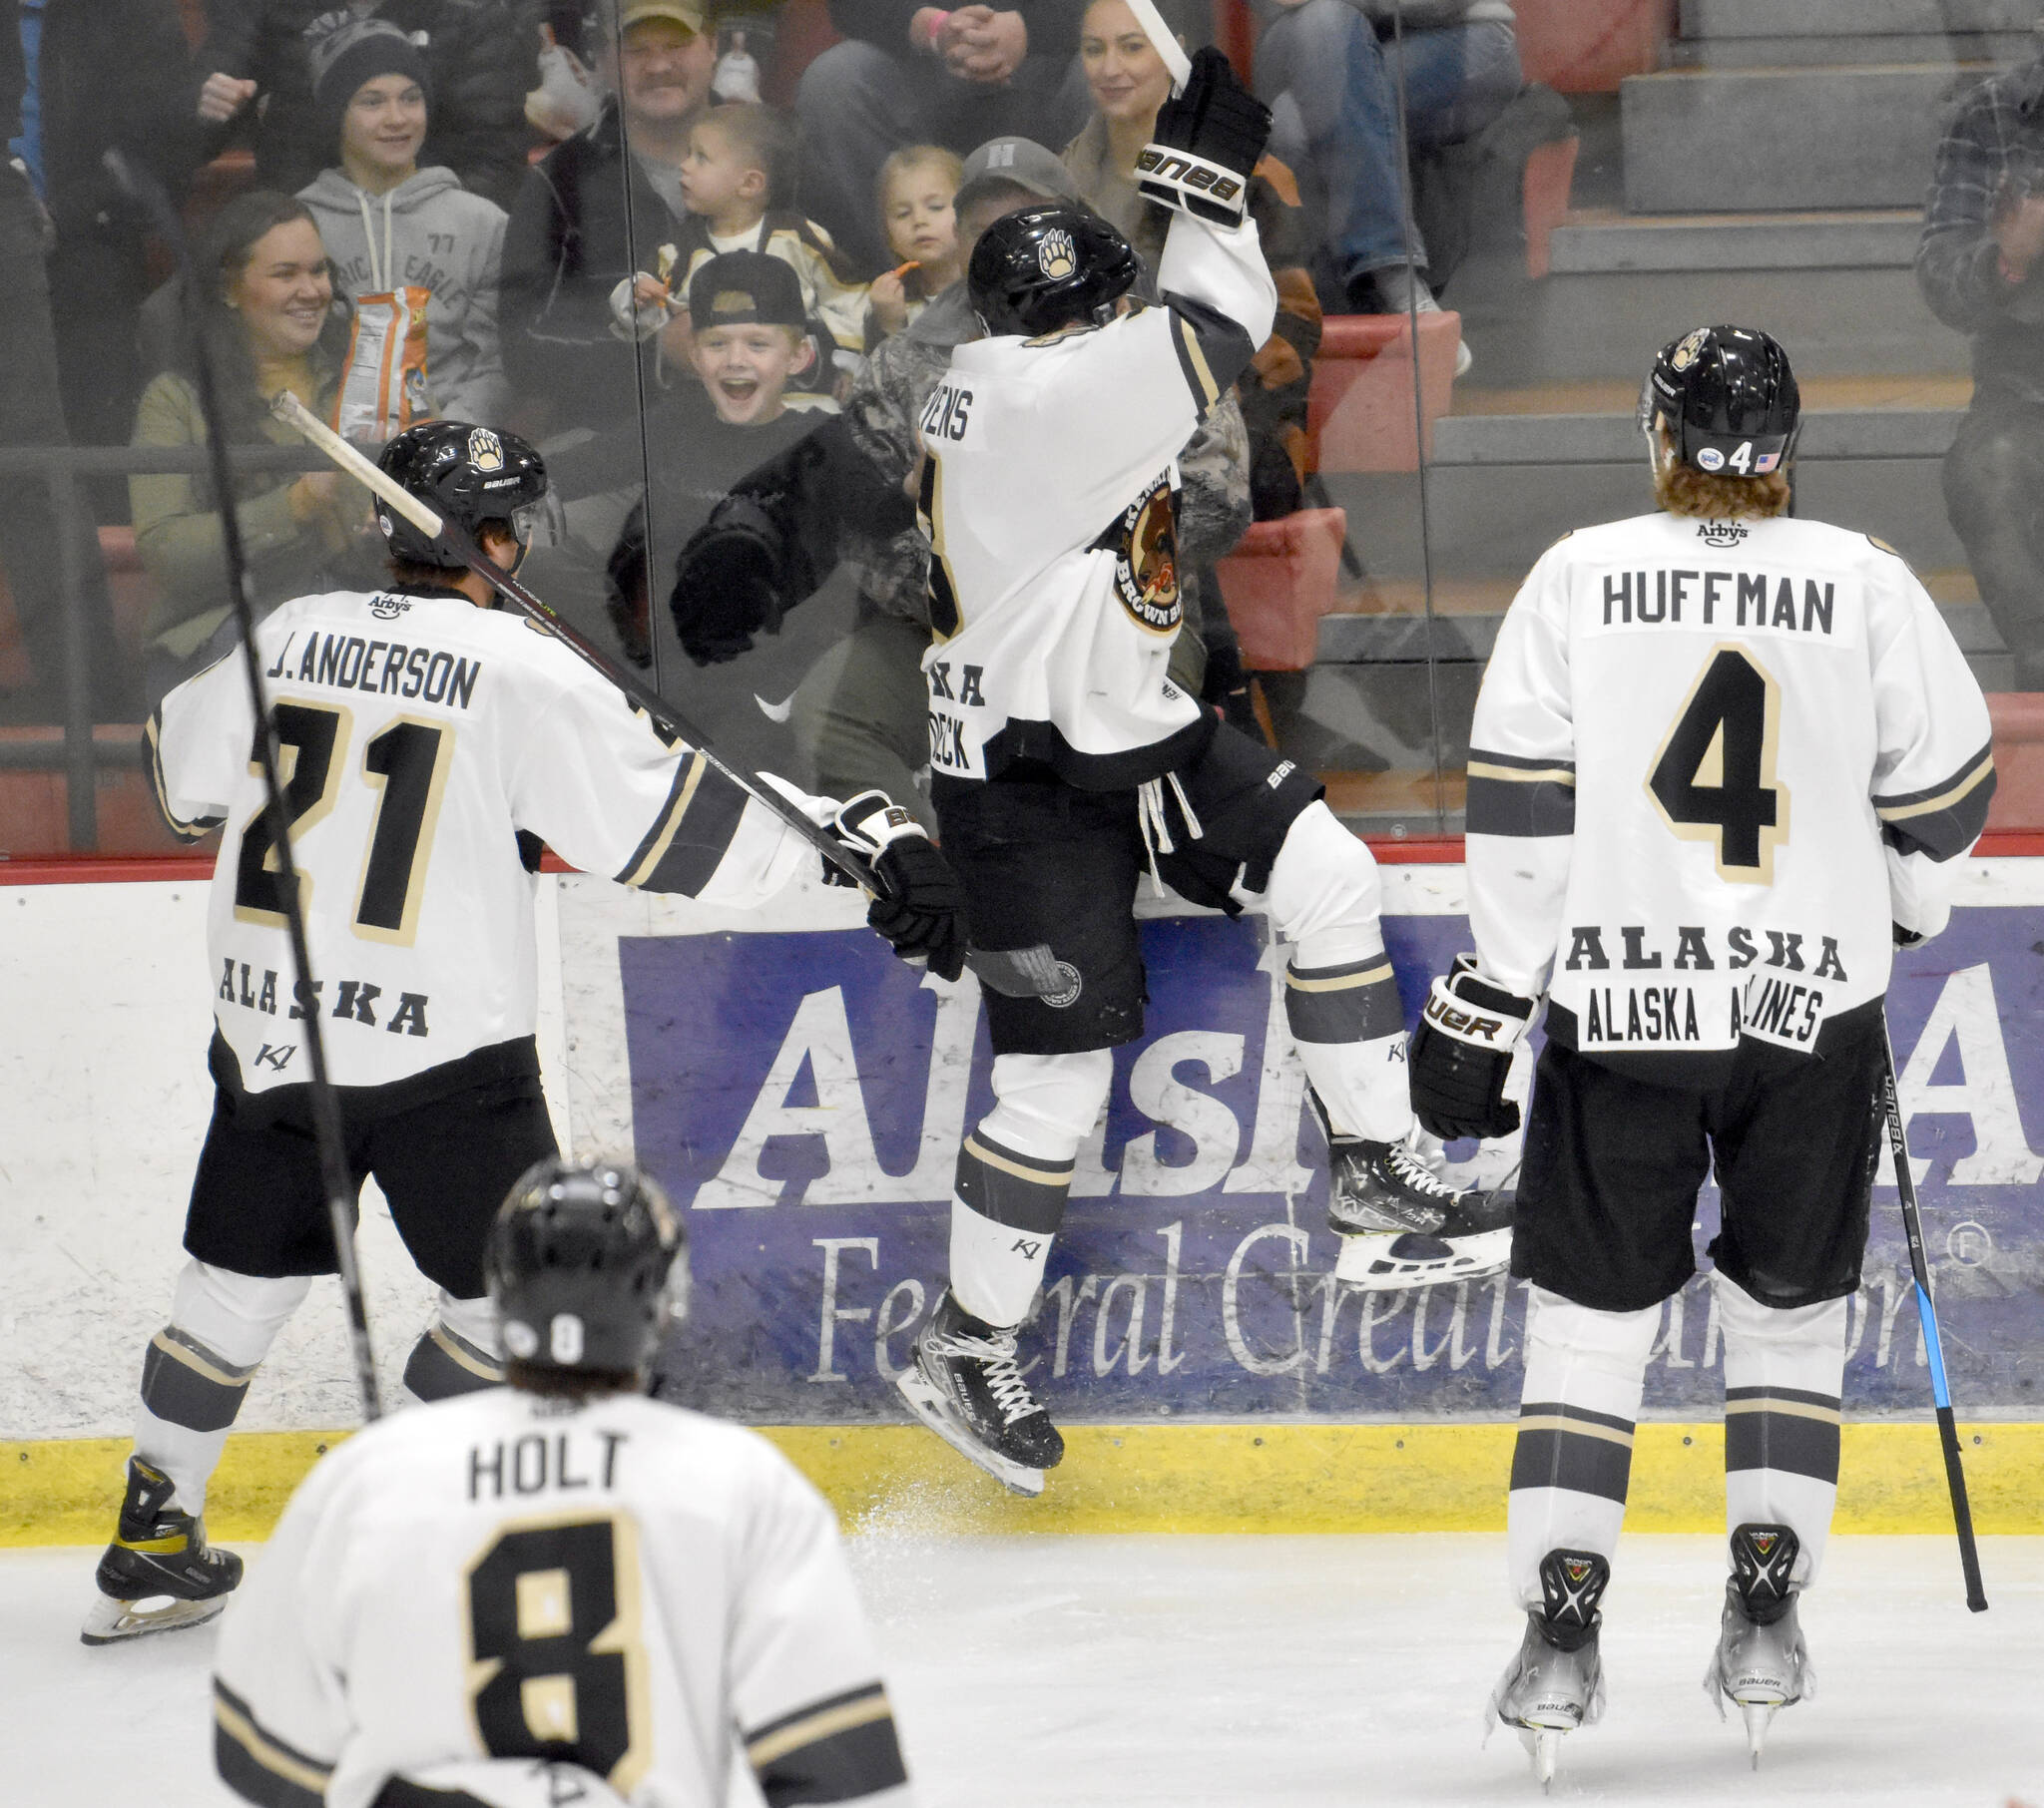 Kenai River’s Nick Stevens celebrates scoring his team’s first home goal of the season Friday, Oct. 14, 2022, against the Fairbanks Ice Dogs at the Soldotna Regional Sports Complex in Soldotna, Alaska. Jack Anderson and Caleb Huffman look on. (Photo by Jeff Helminiak/Peninsula Clarion)